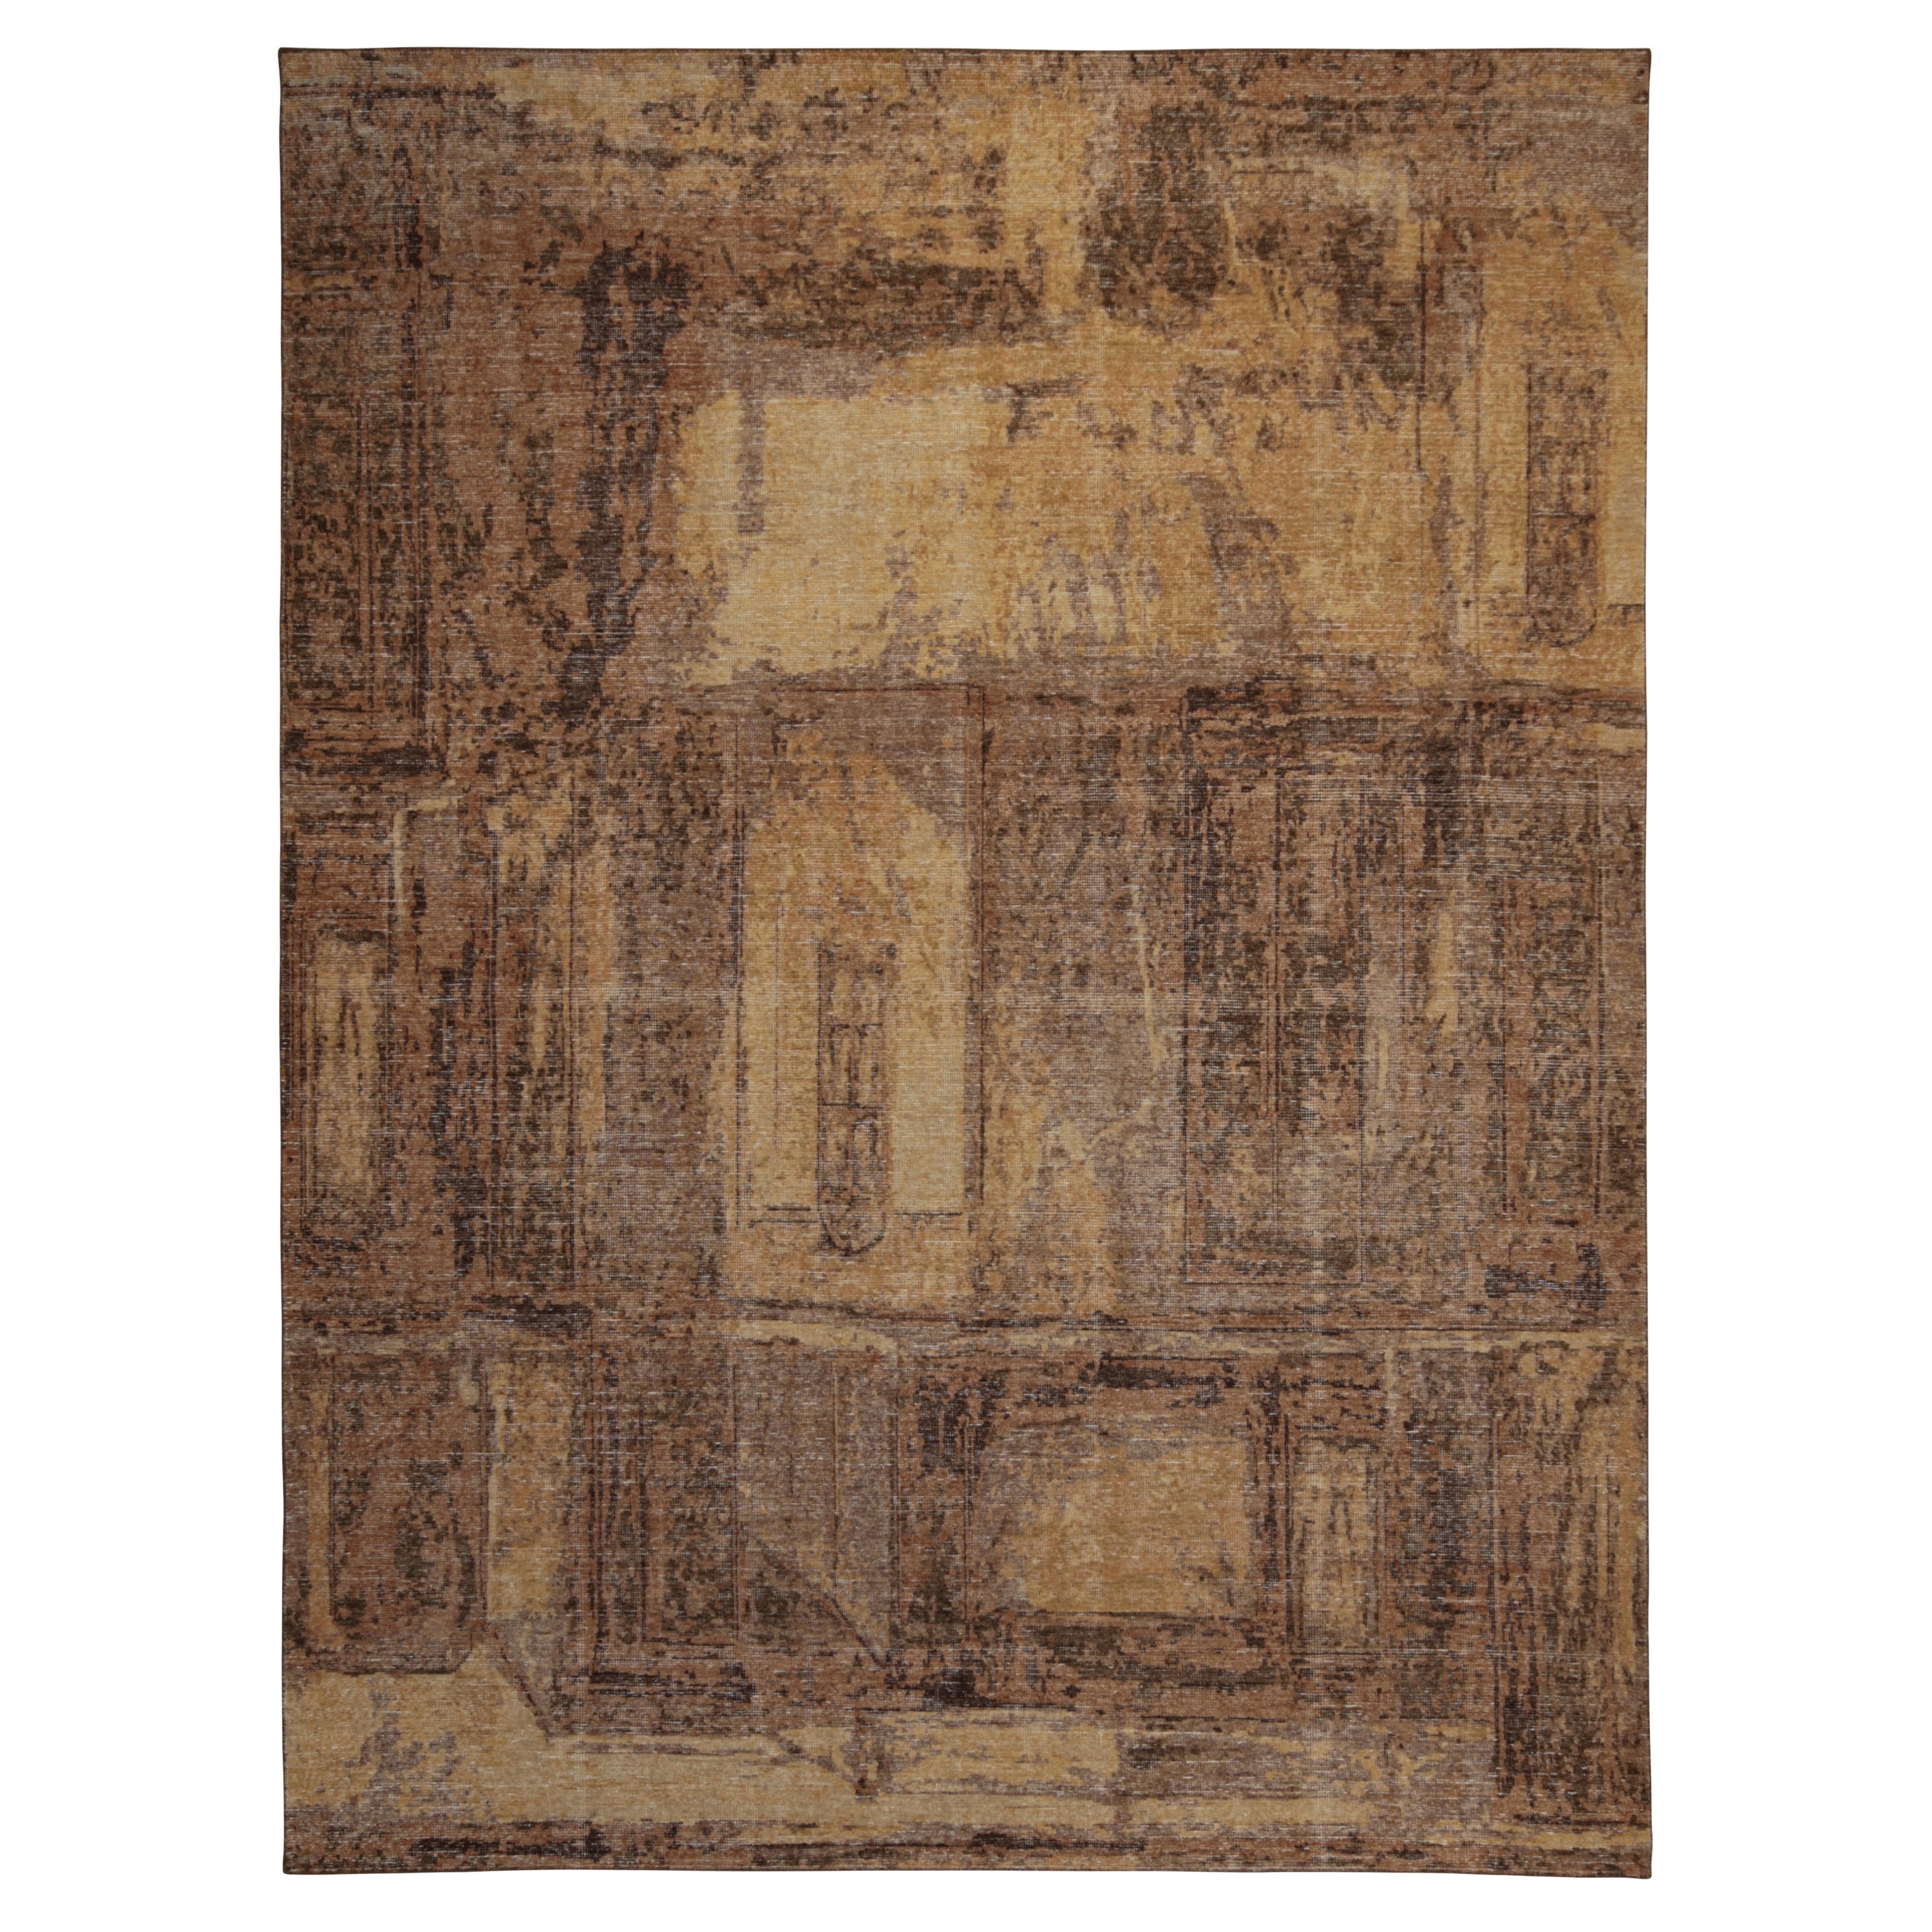 Rug & Kilim's Distressed Style Abstract Rug in Gold, Brown and Purple Patterns (Tapis abstrait à motifs dorés, bruns et violets)